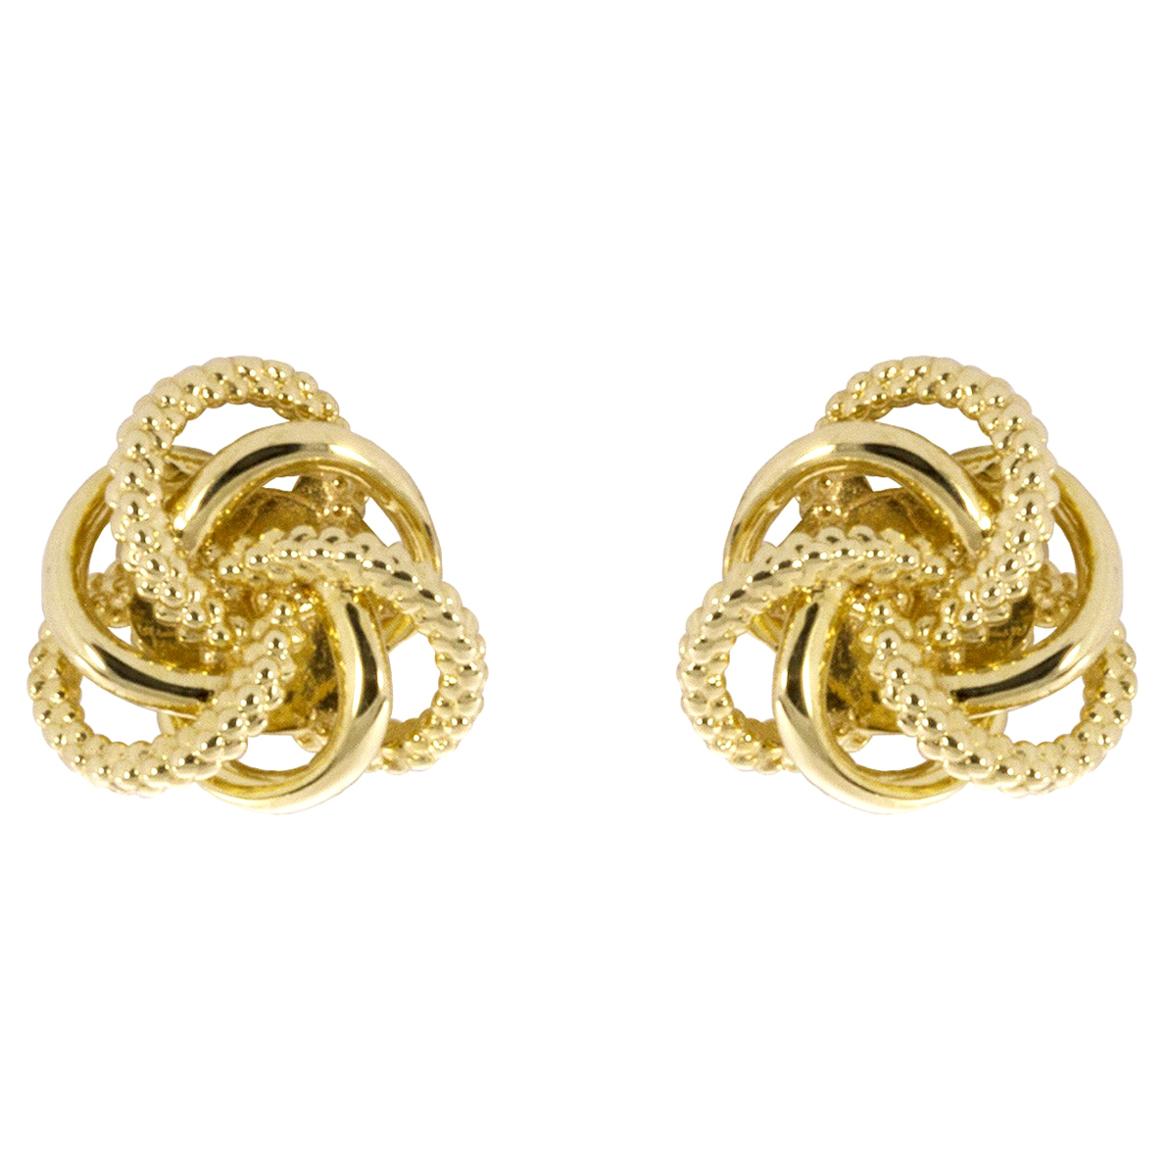 Lagos Love Knot Yellow Gold Studded Earrings